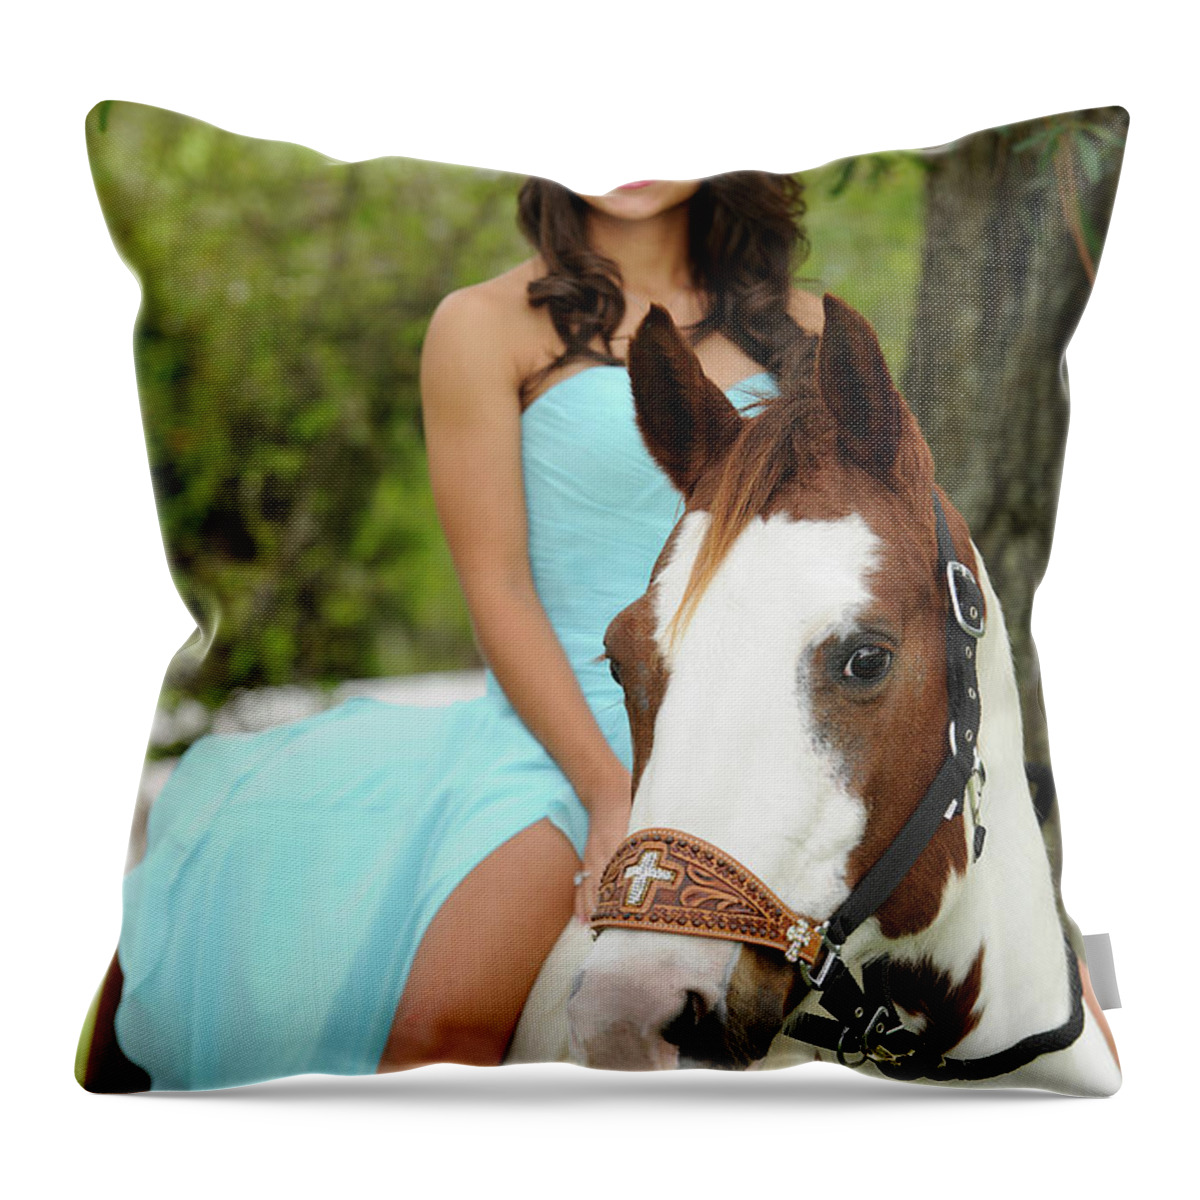  Throw Pillow featuring the photograph Girl 6 by Keith Lovejoy